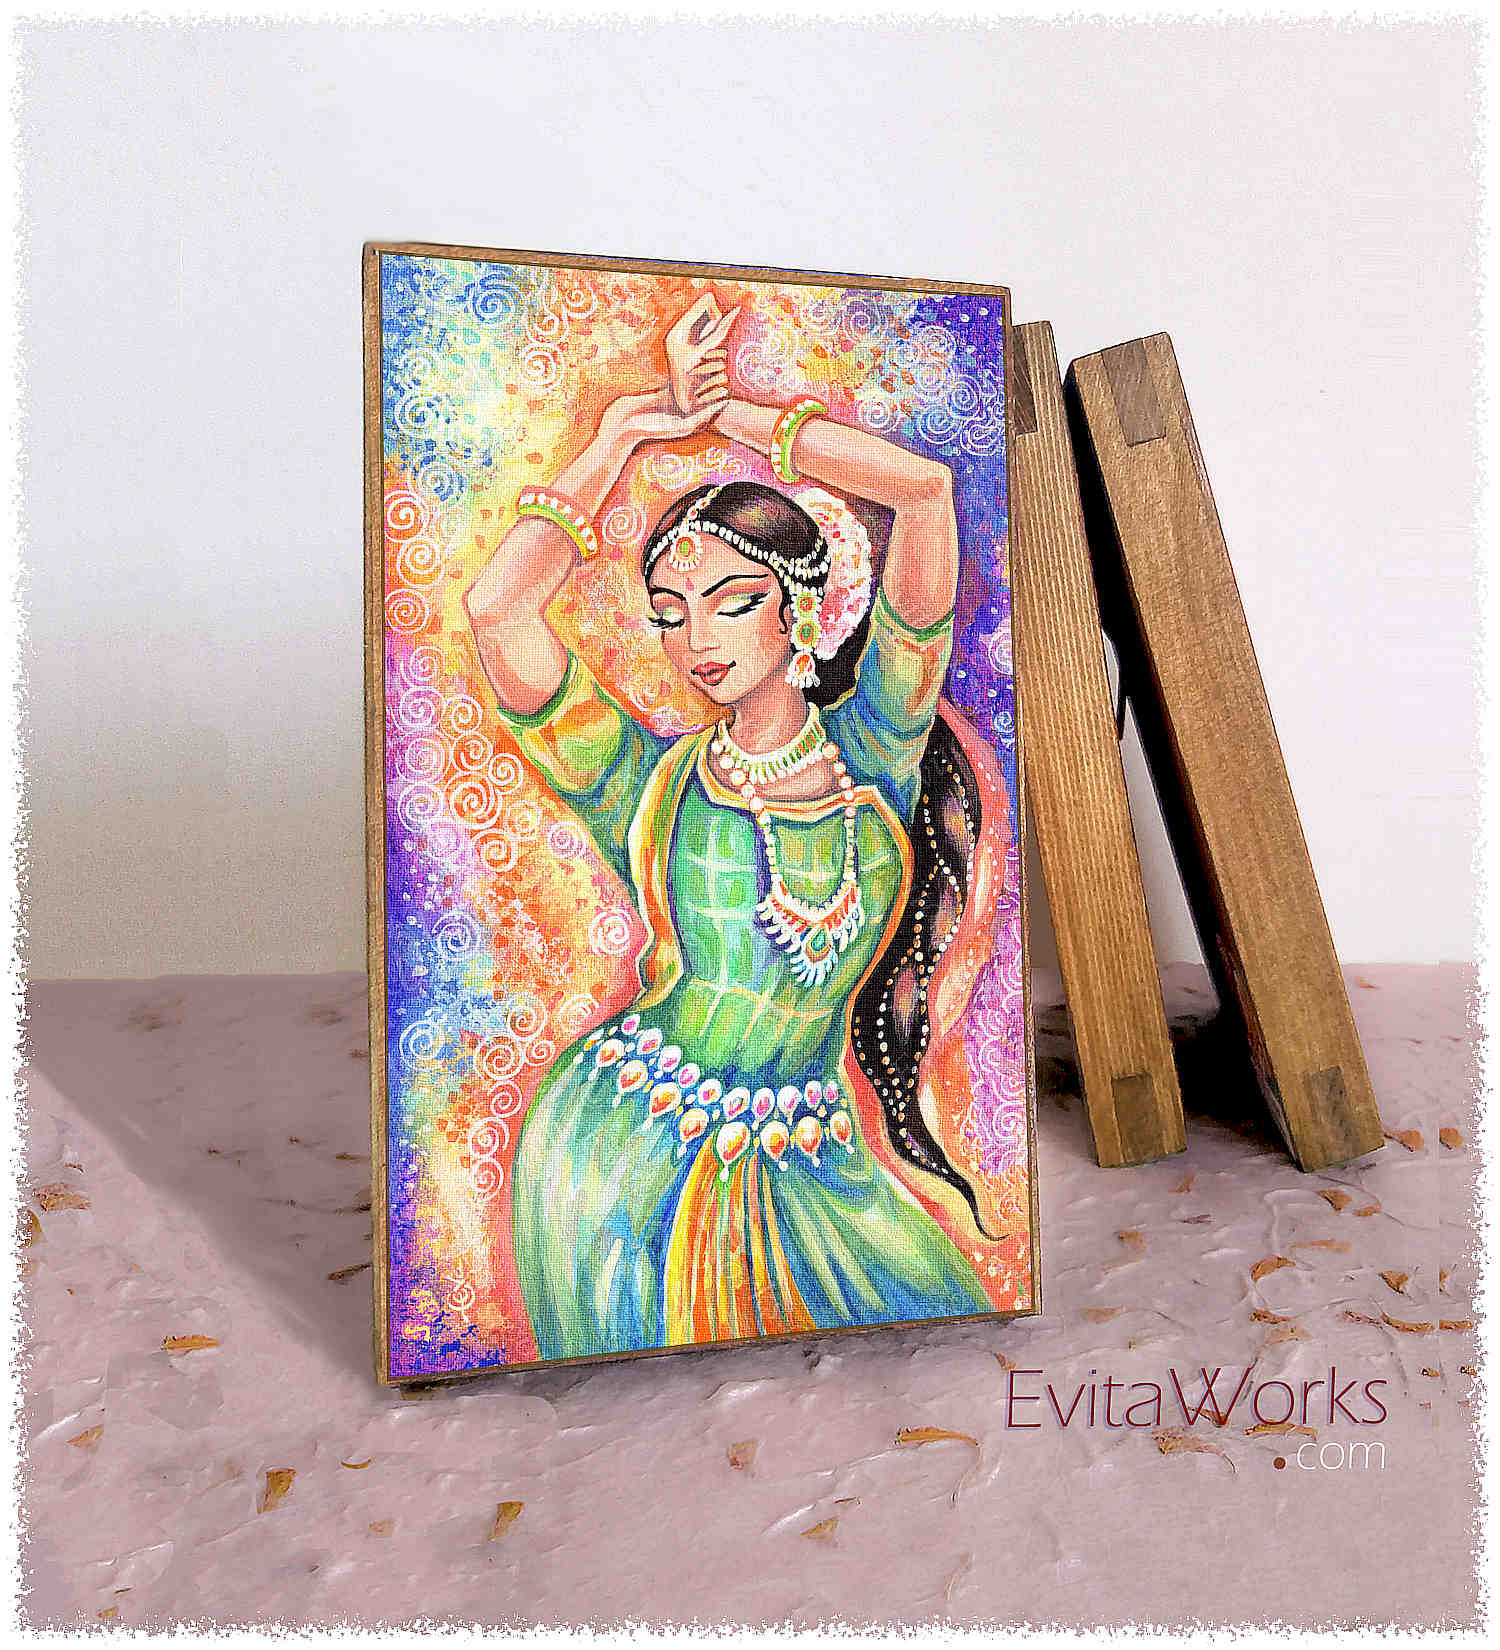 Hit to learn about "Light of Ishwari, Indian dancer" on woodblocks